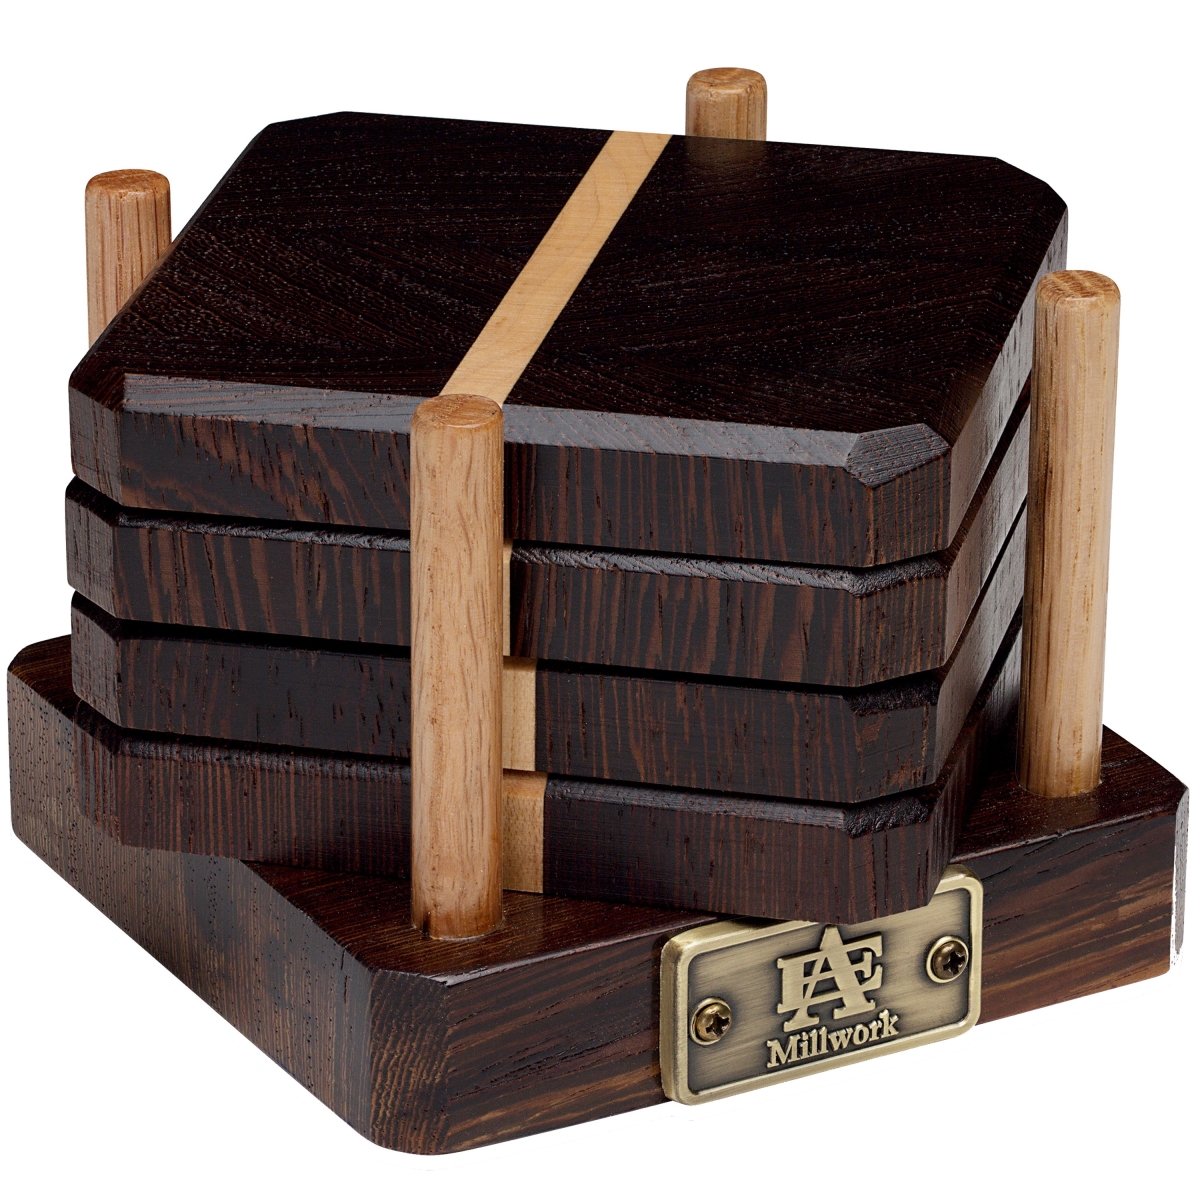 Picture of A & E Millwork AEM-5006 Wenge & Maple Wood Coasters End Grain with Base - Set of 4